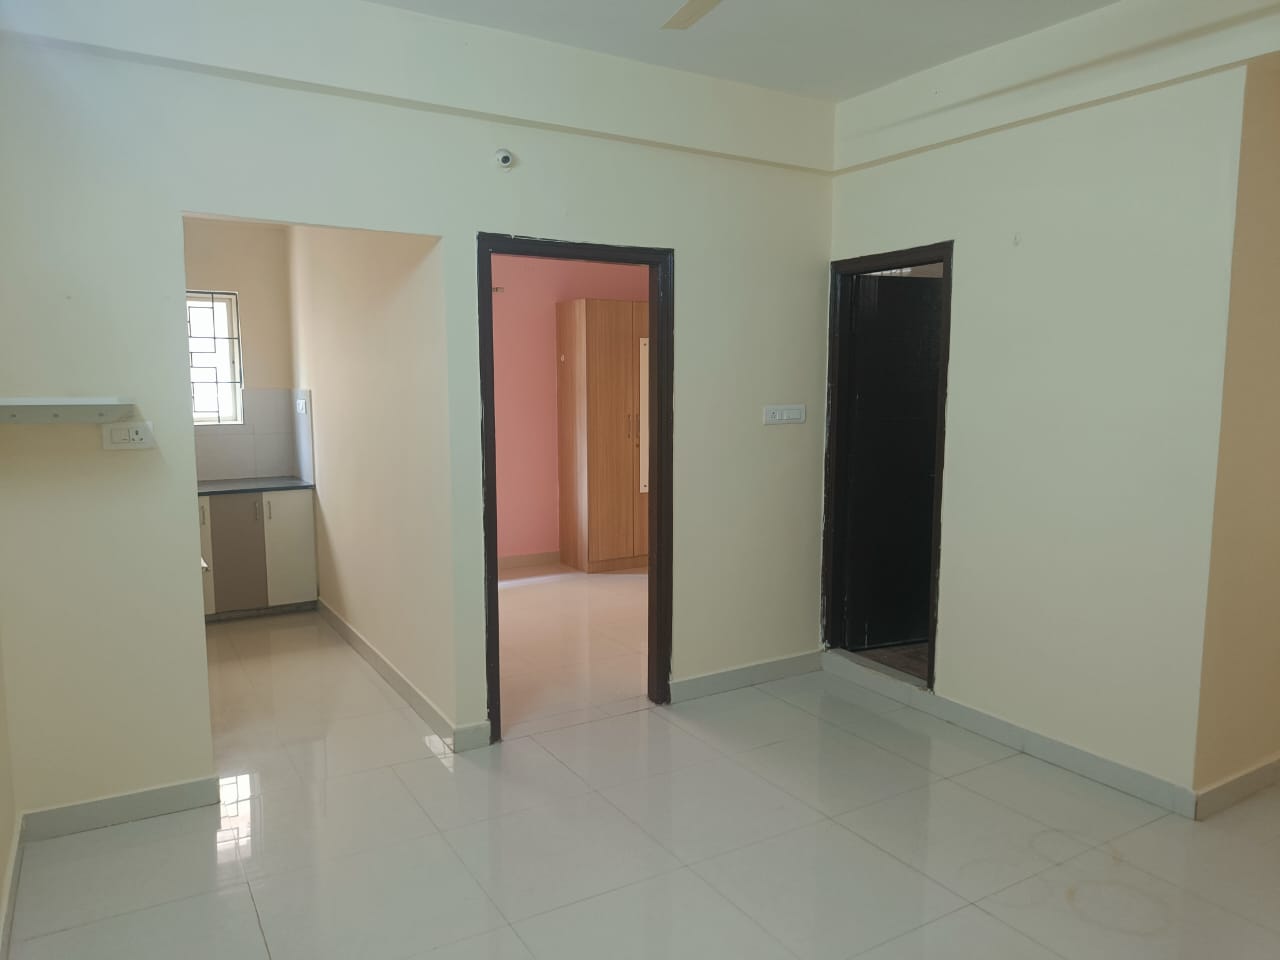 3 BHK Independent House for Lease Only at JAML2 - 4411 in Dodda Banaswadi